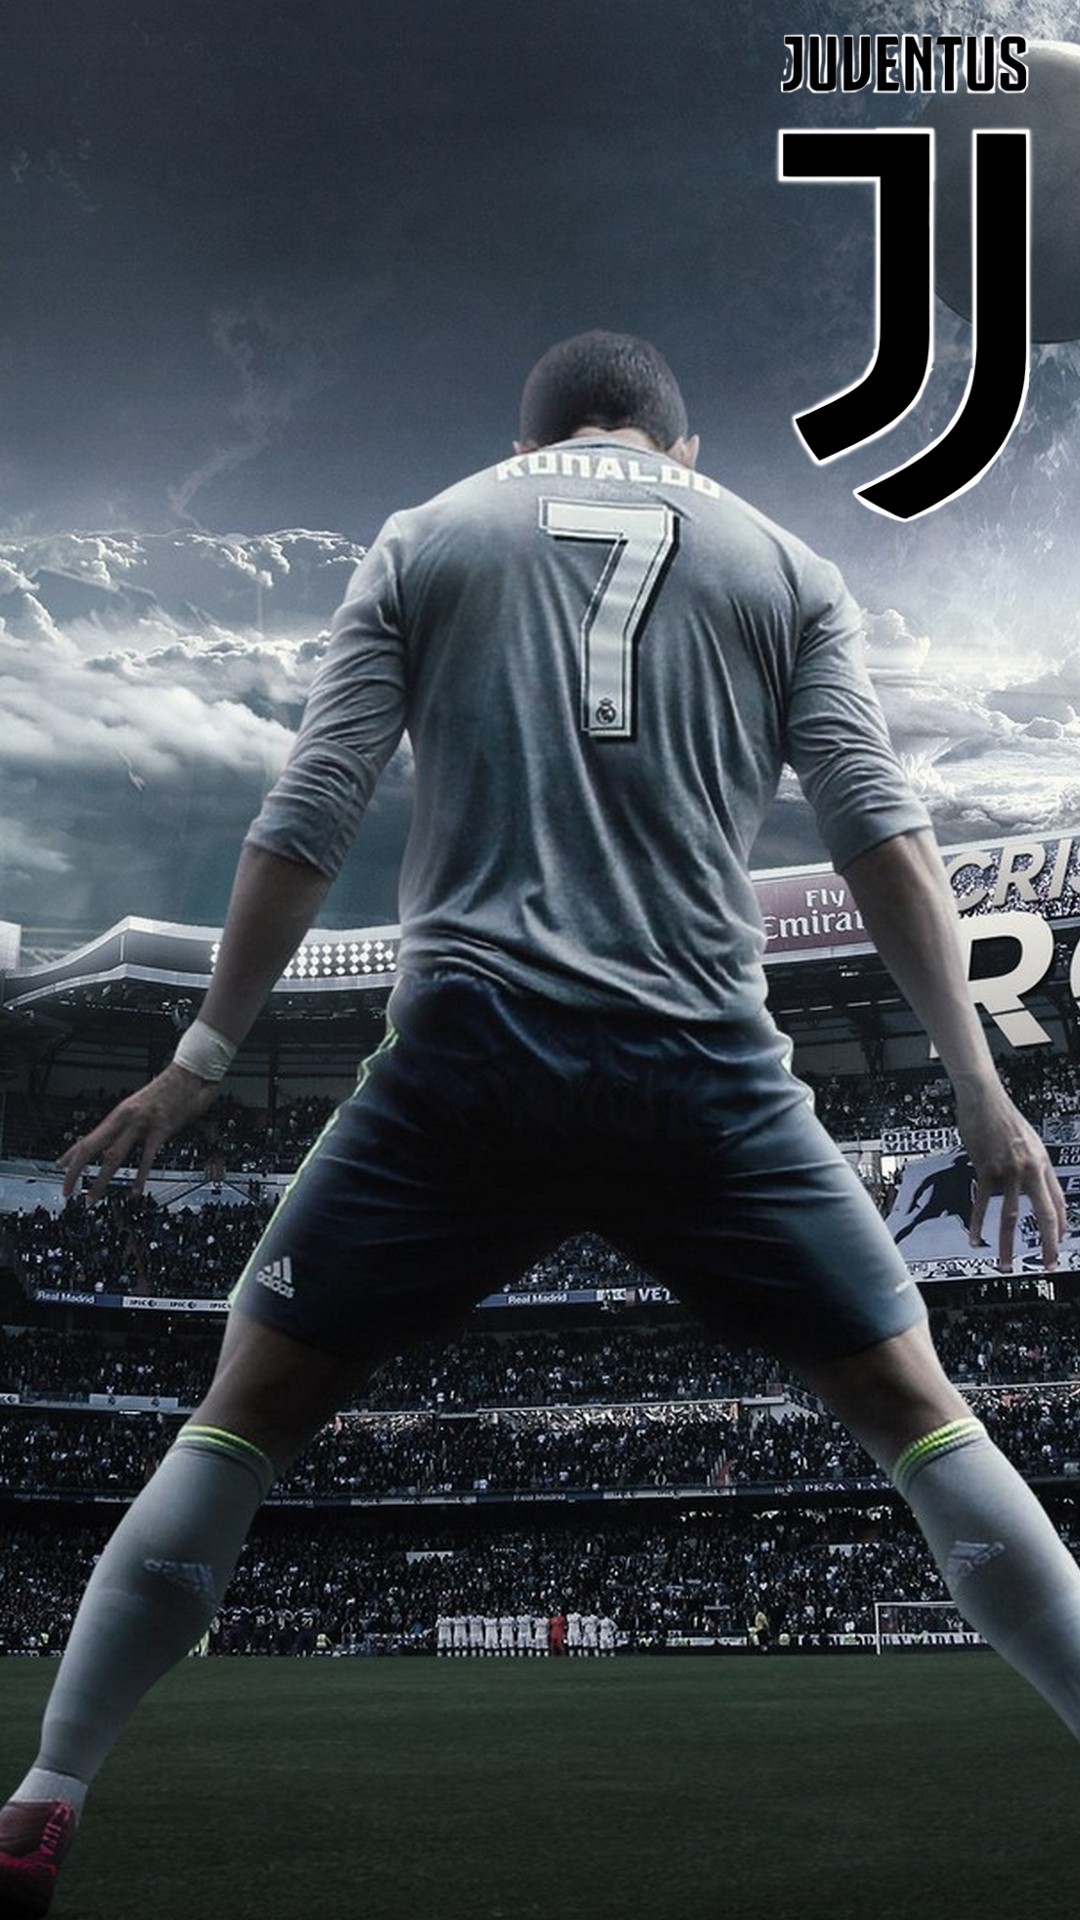 Wallpaper C Ronaldo Juventus iPhone With Resolution 1080X1920 pixel. You can make this wallpaper for your Mac or Windows Desktop Background, iPhone, Android or Tablet and another Smartphone device for free